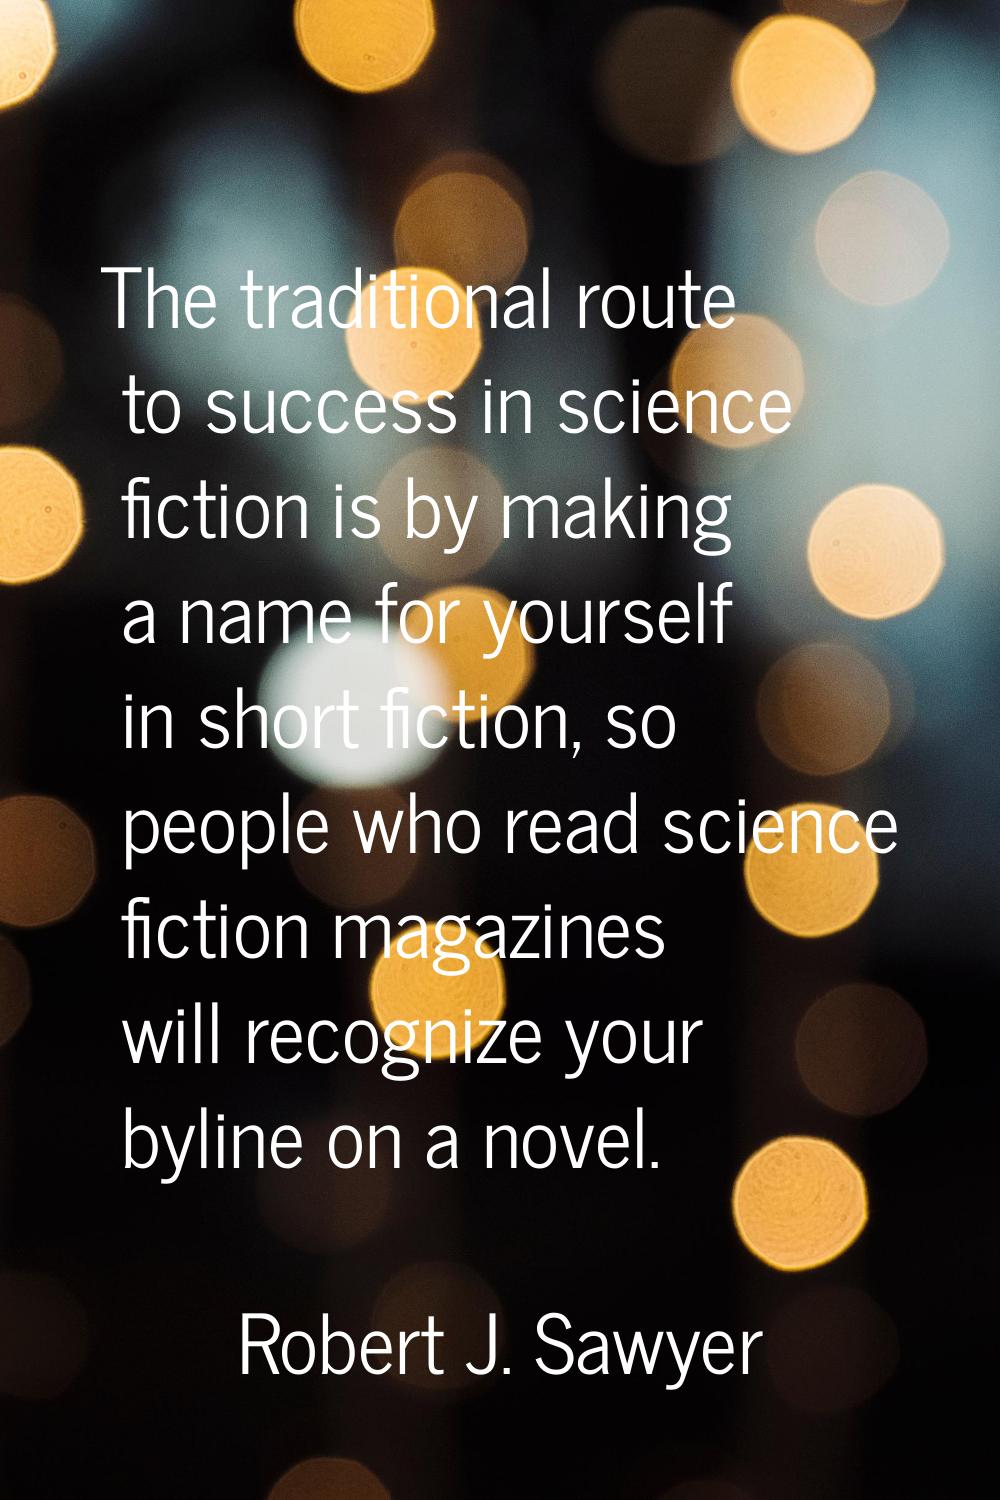 The traditional route to success in science fiction is by making a name for yourself in short ficti